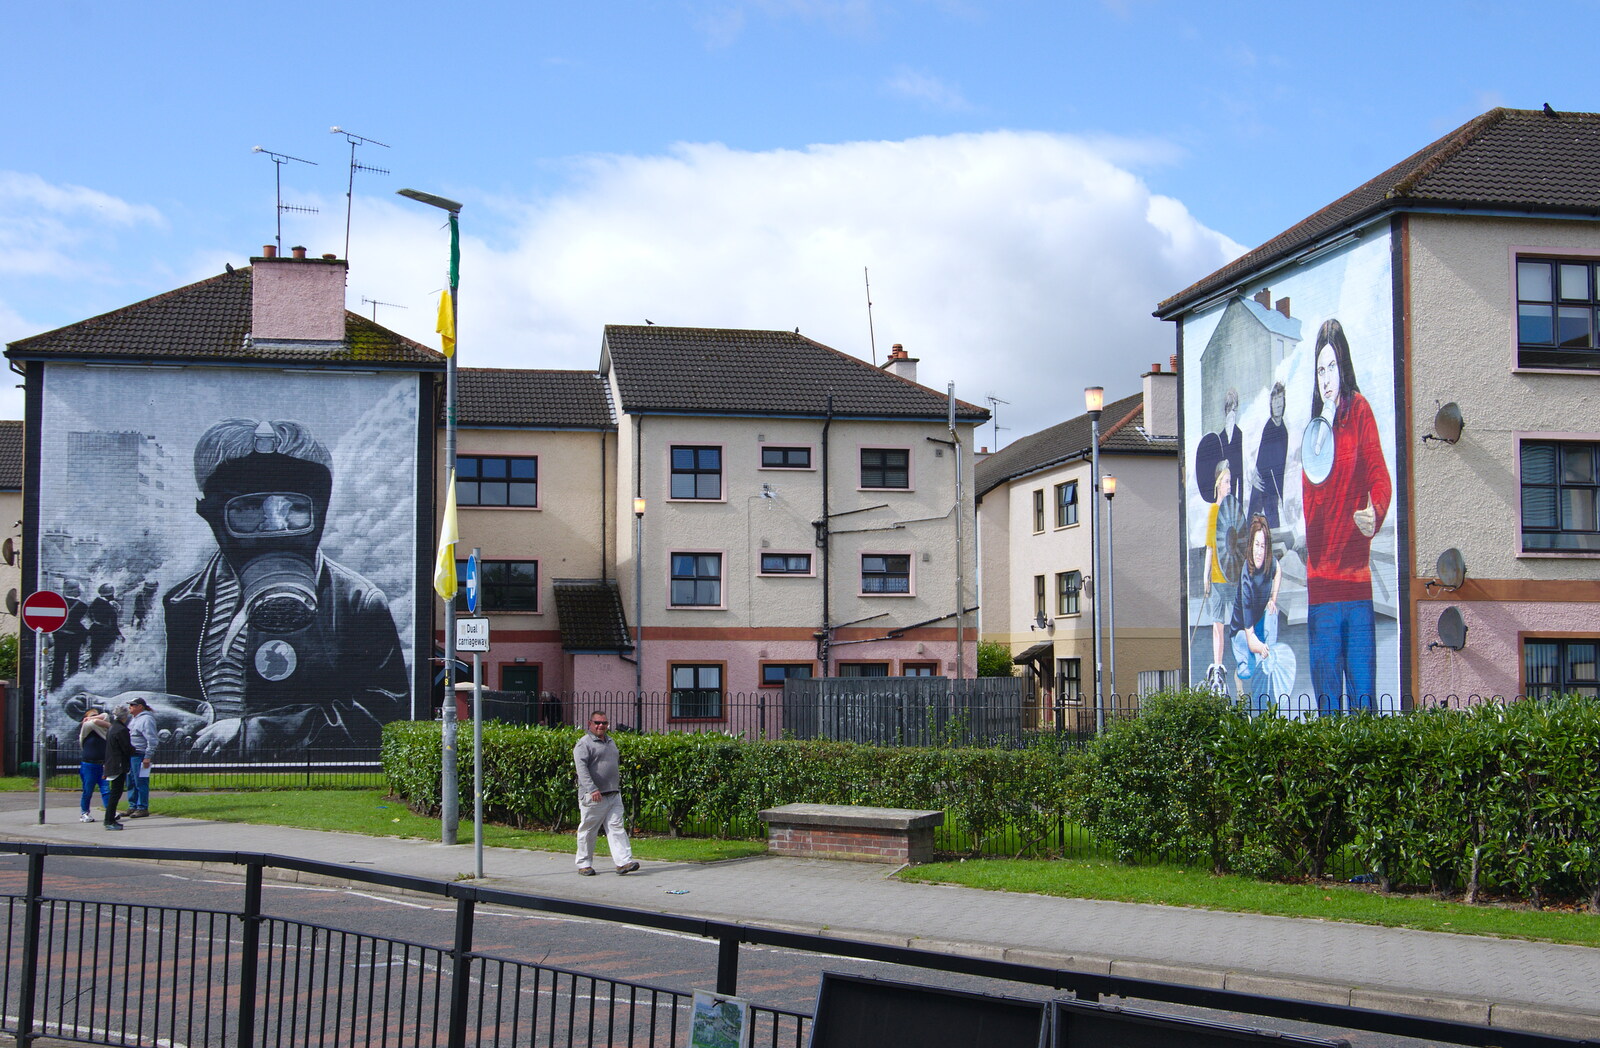 More murals from A Day in Derry, County Londonderry, Northern Ireland - 15th August 2019